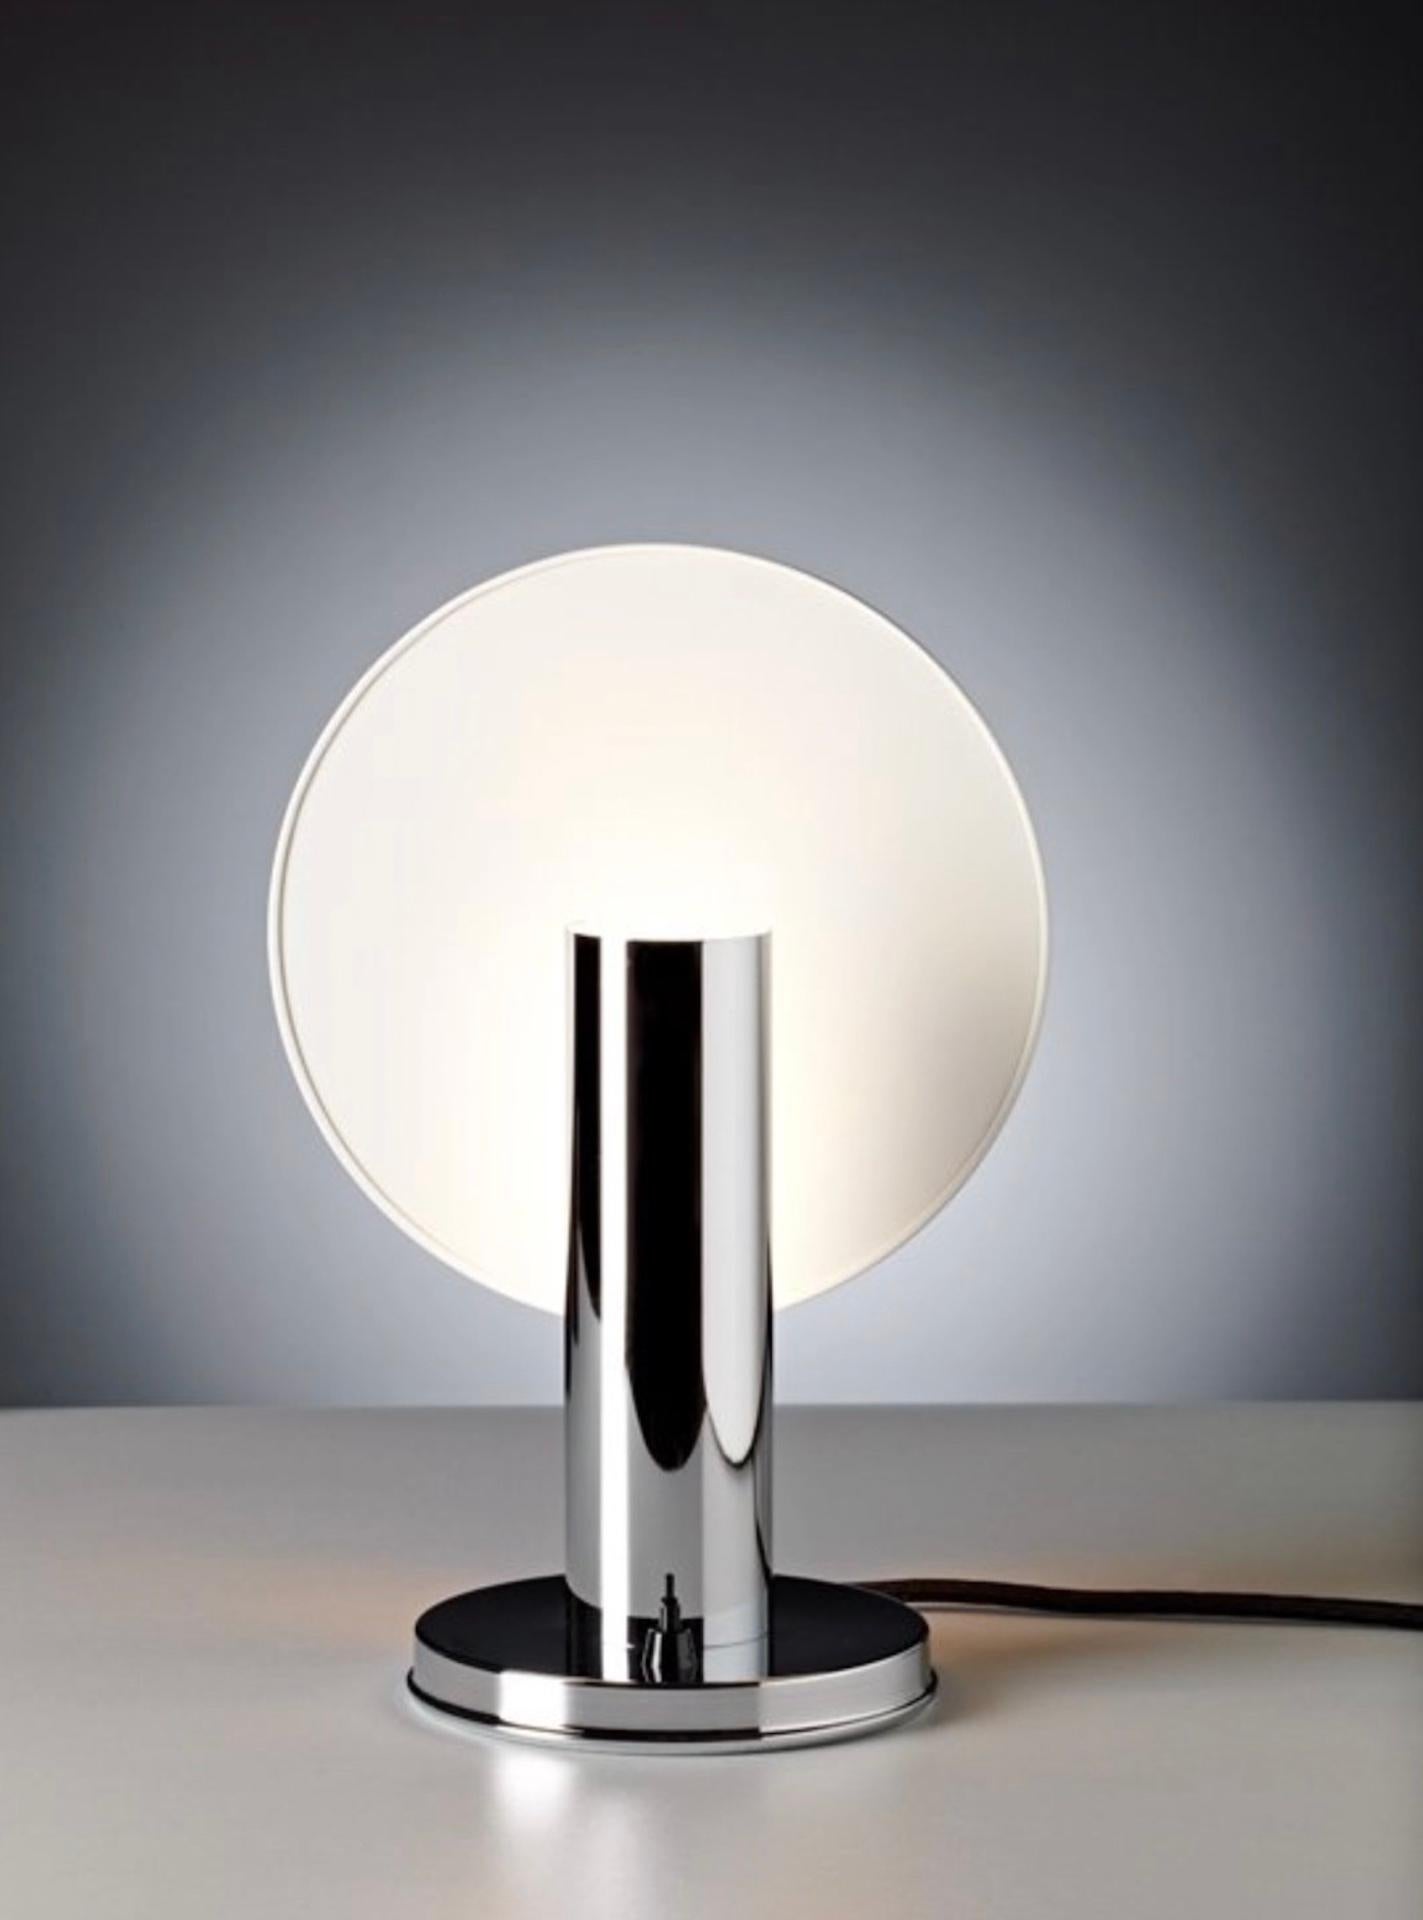 The light source for this bedside lamp is concealed in a cylinder that stands on a round baseplate, and the glow is reflected softly by a white varnished pane. The reflector screen is mounted asymmetrically and can be adjusted by simply turning it.